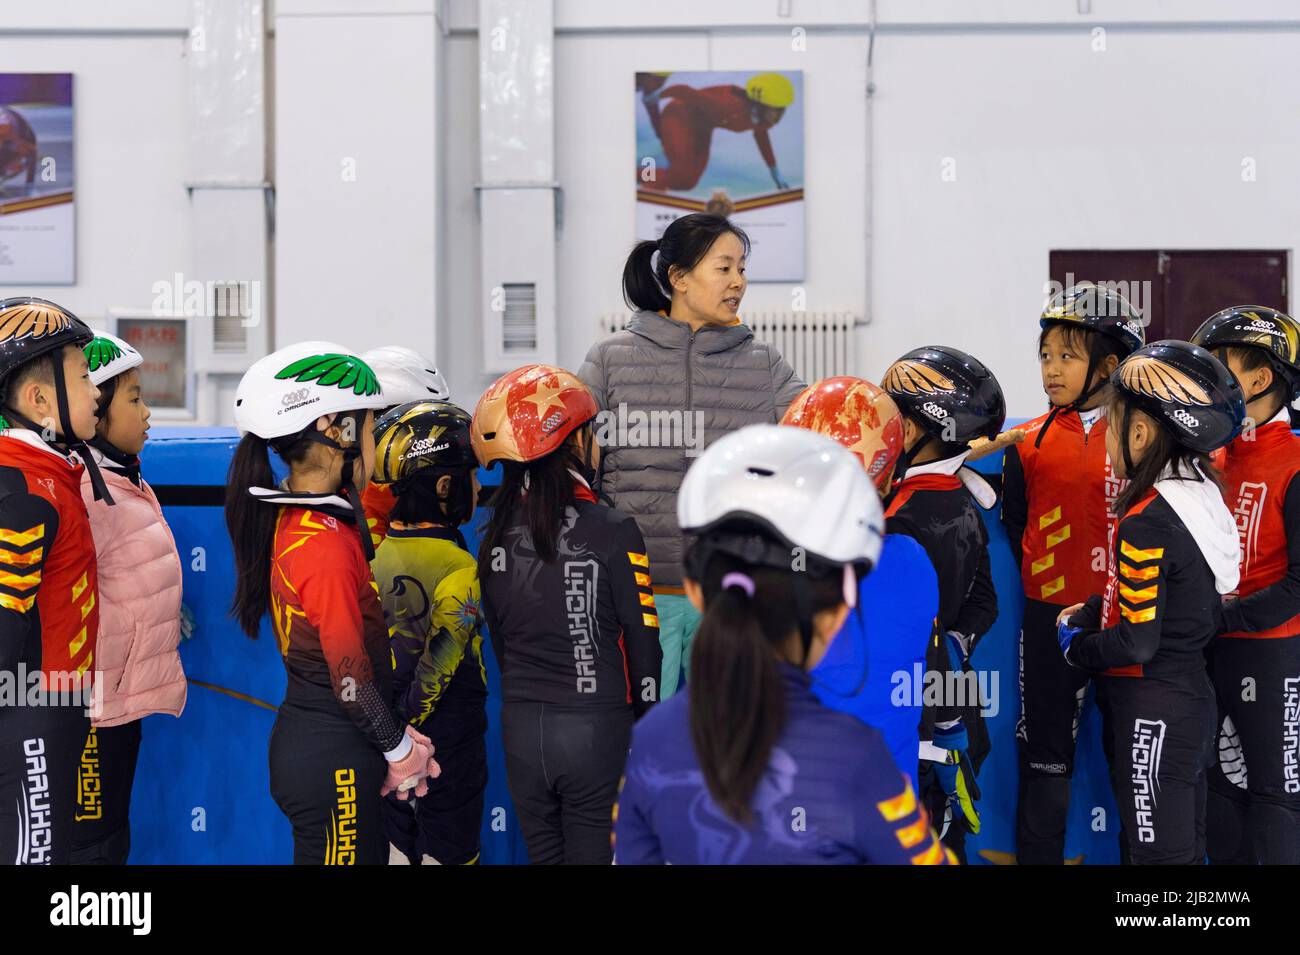 (220602) -- QITAIHE, June 2, 2022 (Xinhua) -- Han Mei, coach of Qitaihe Juvenile's Short-Track Speed Skating Amateur Sports School guides young athletes during a training session at Qitaihe Sports Center in Qitaihe City, northeast China's Heilongjiang Province, May 30, 2022. Qitaihe City in Heilongjiang Province, famed for its short-track speed skating talents, has trained 10 world champions including Yang Yang, Wang Meng and Fan Kexin. Generations of coachs in the city have endeavored to discover and train young talents for short-track speed skating. (Xinhua/Xie Jianfei) Stock Photo